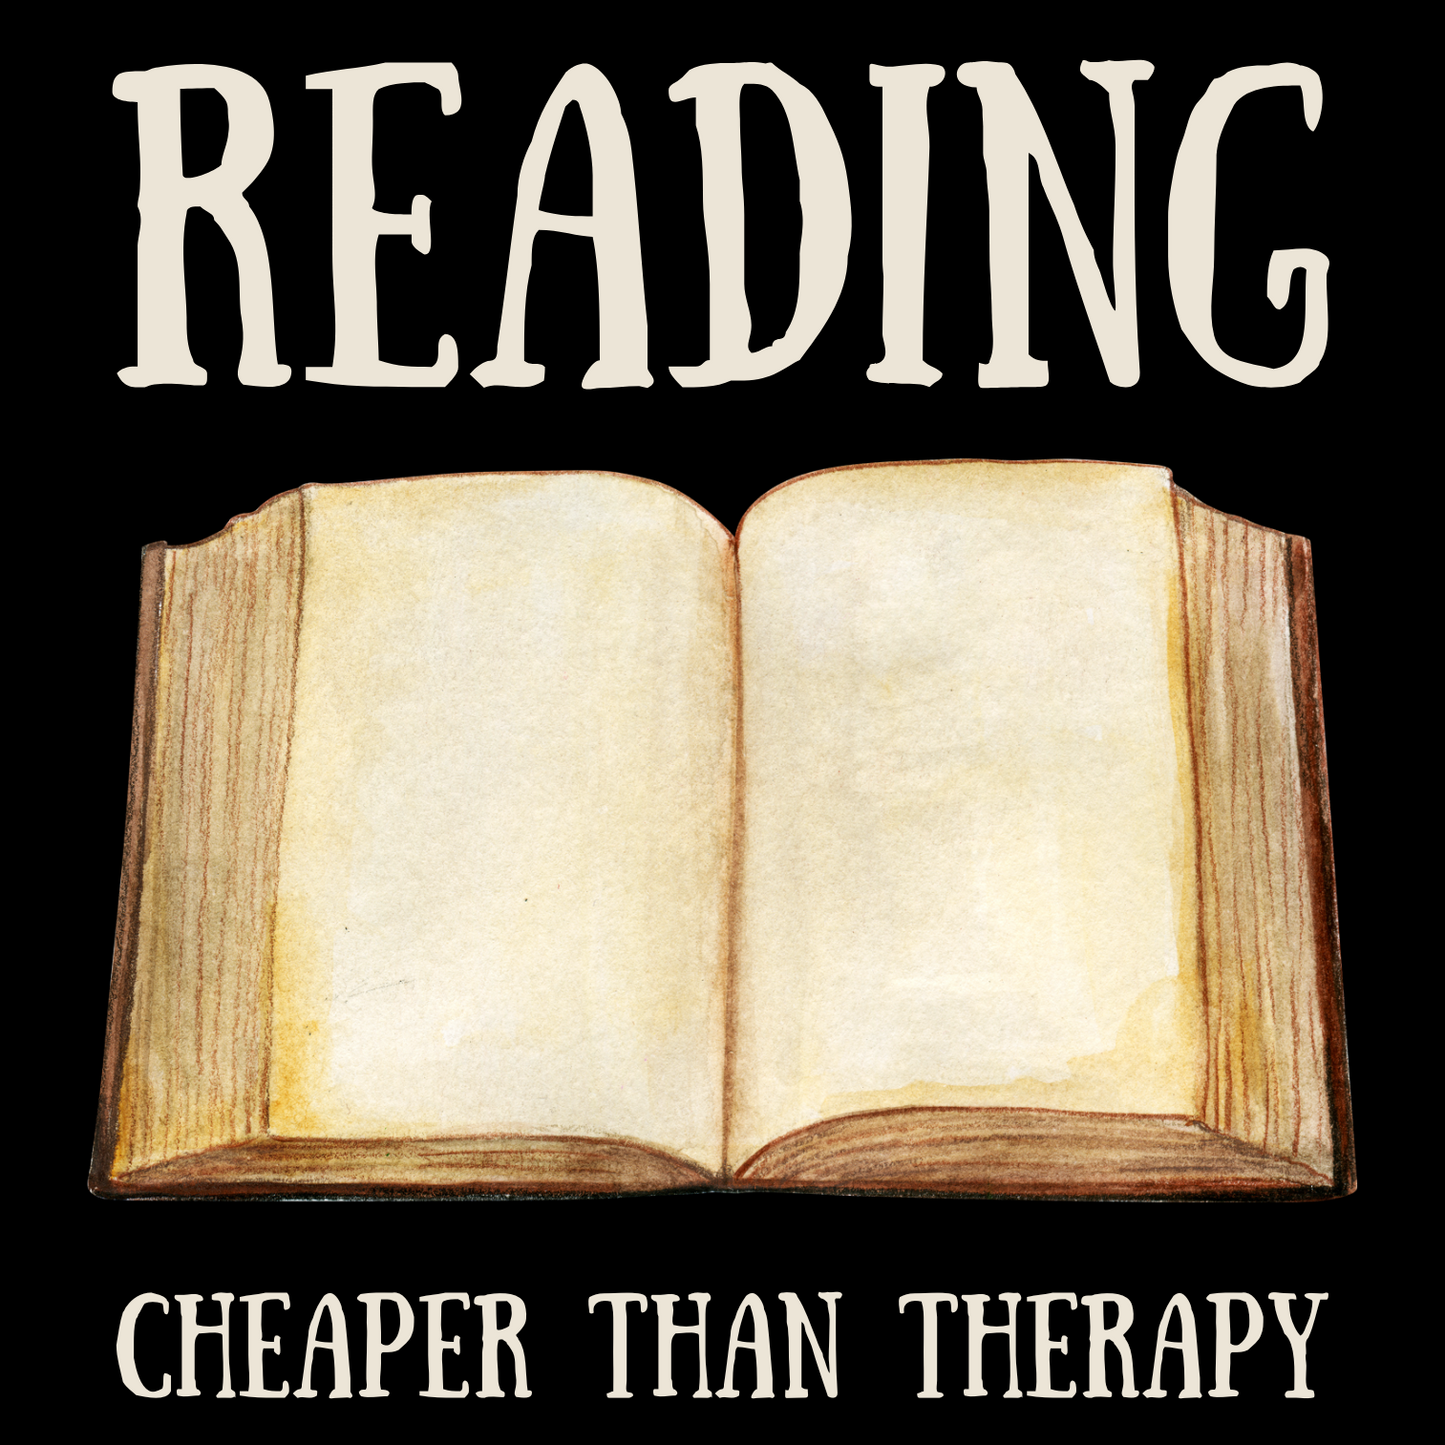 Reading Cheaper Than Therapy Bella Canvas 3001 Unisex Tee